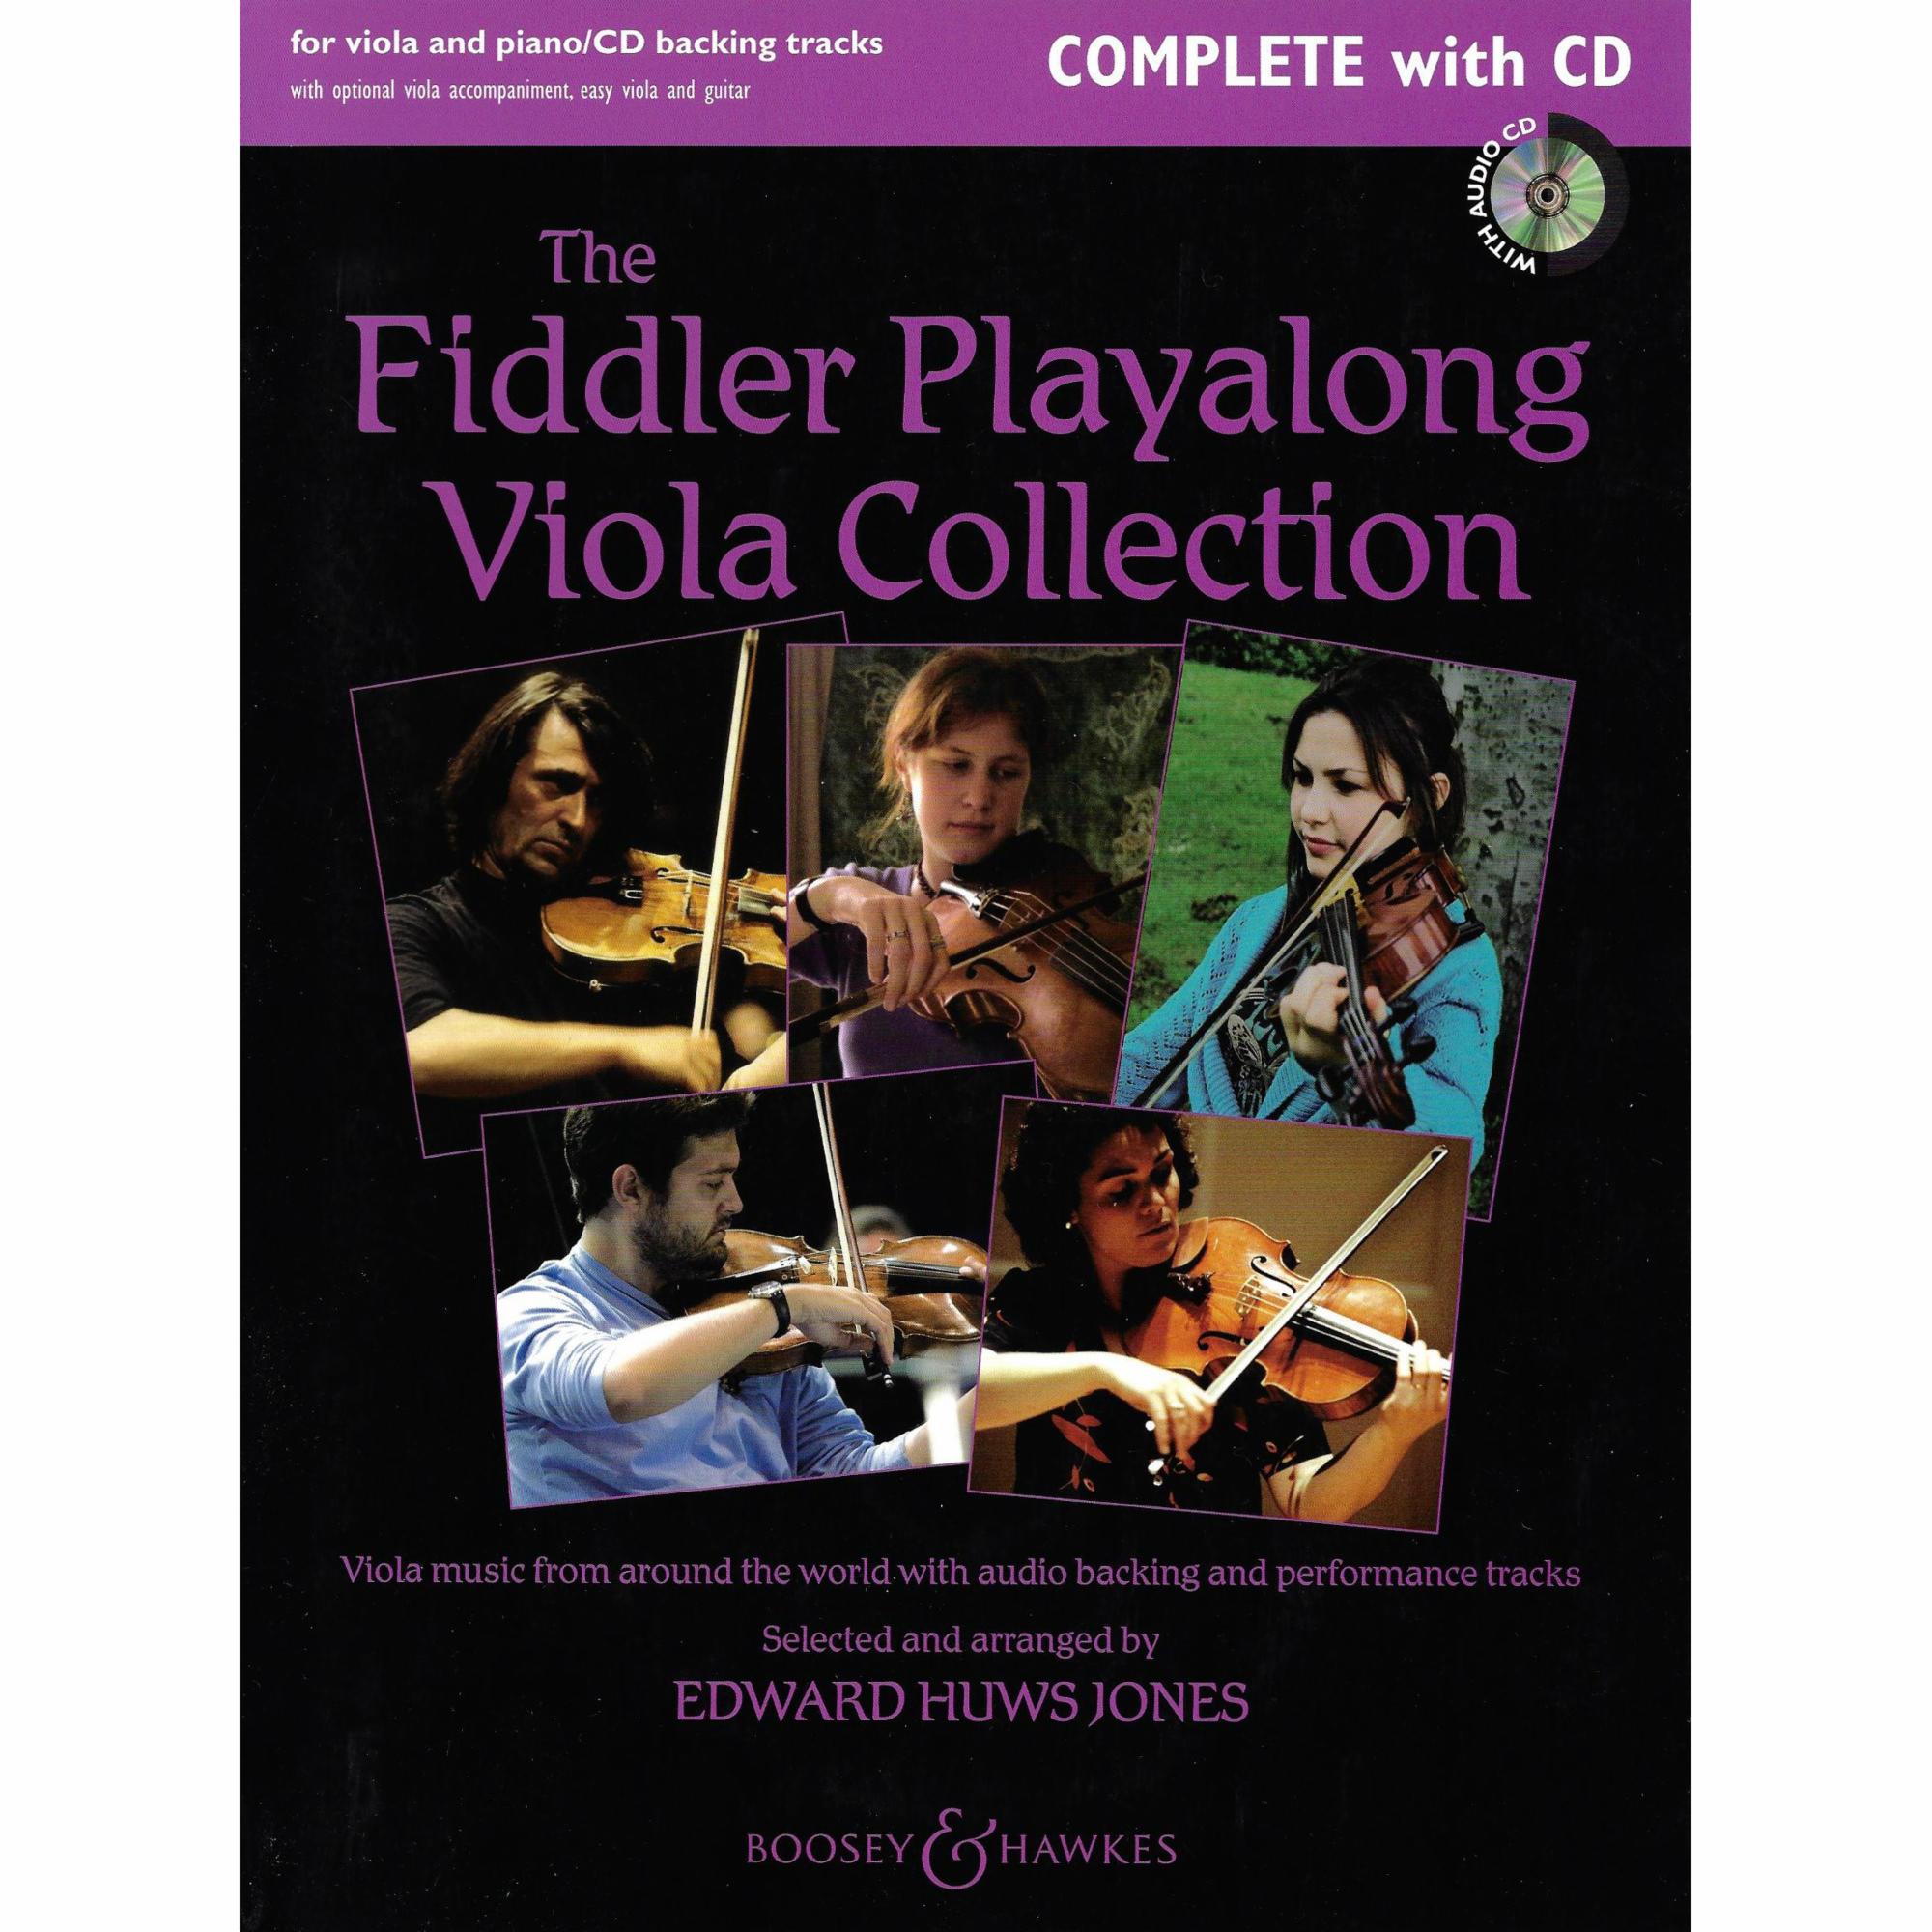 The Fiddler Playalong Viola Collection